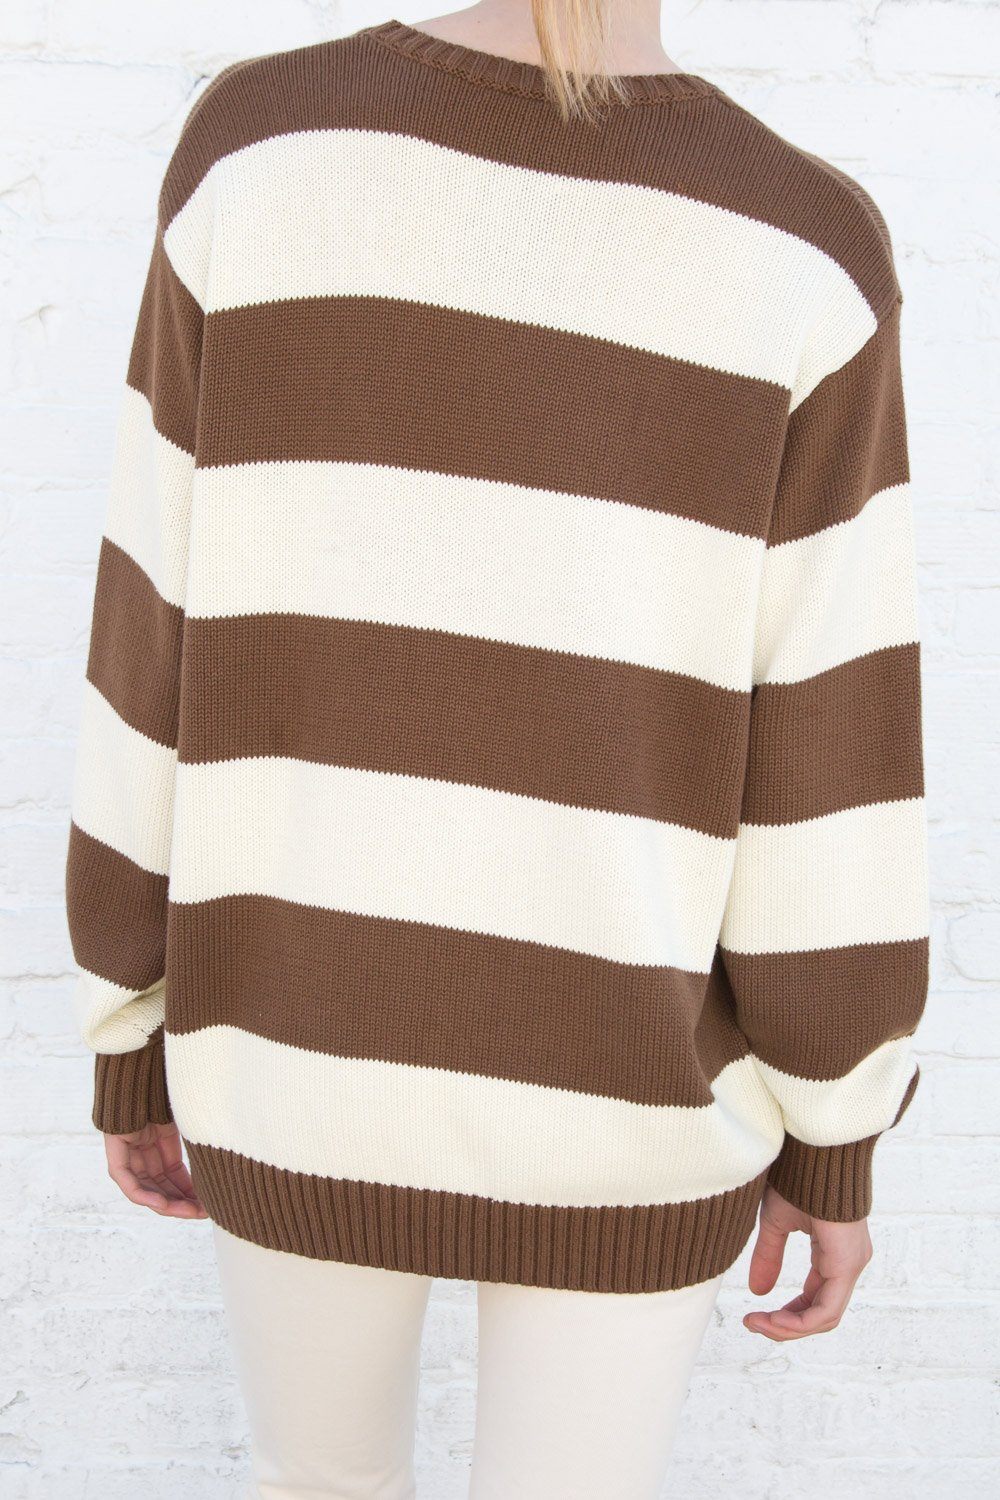 Sweater is from brandy melville  Brown cable knit sweater, White